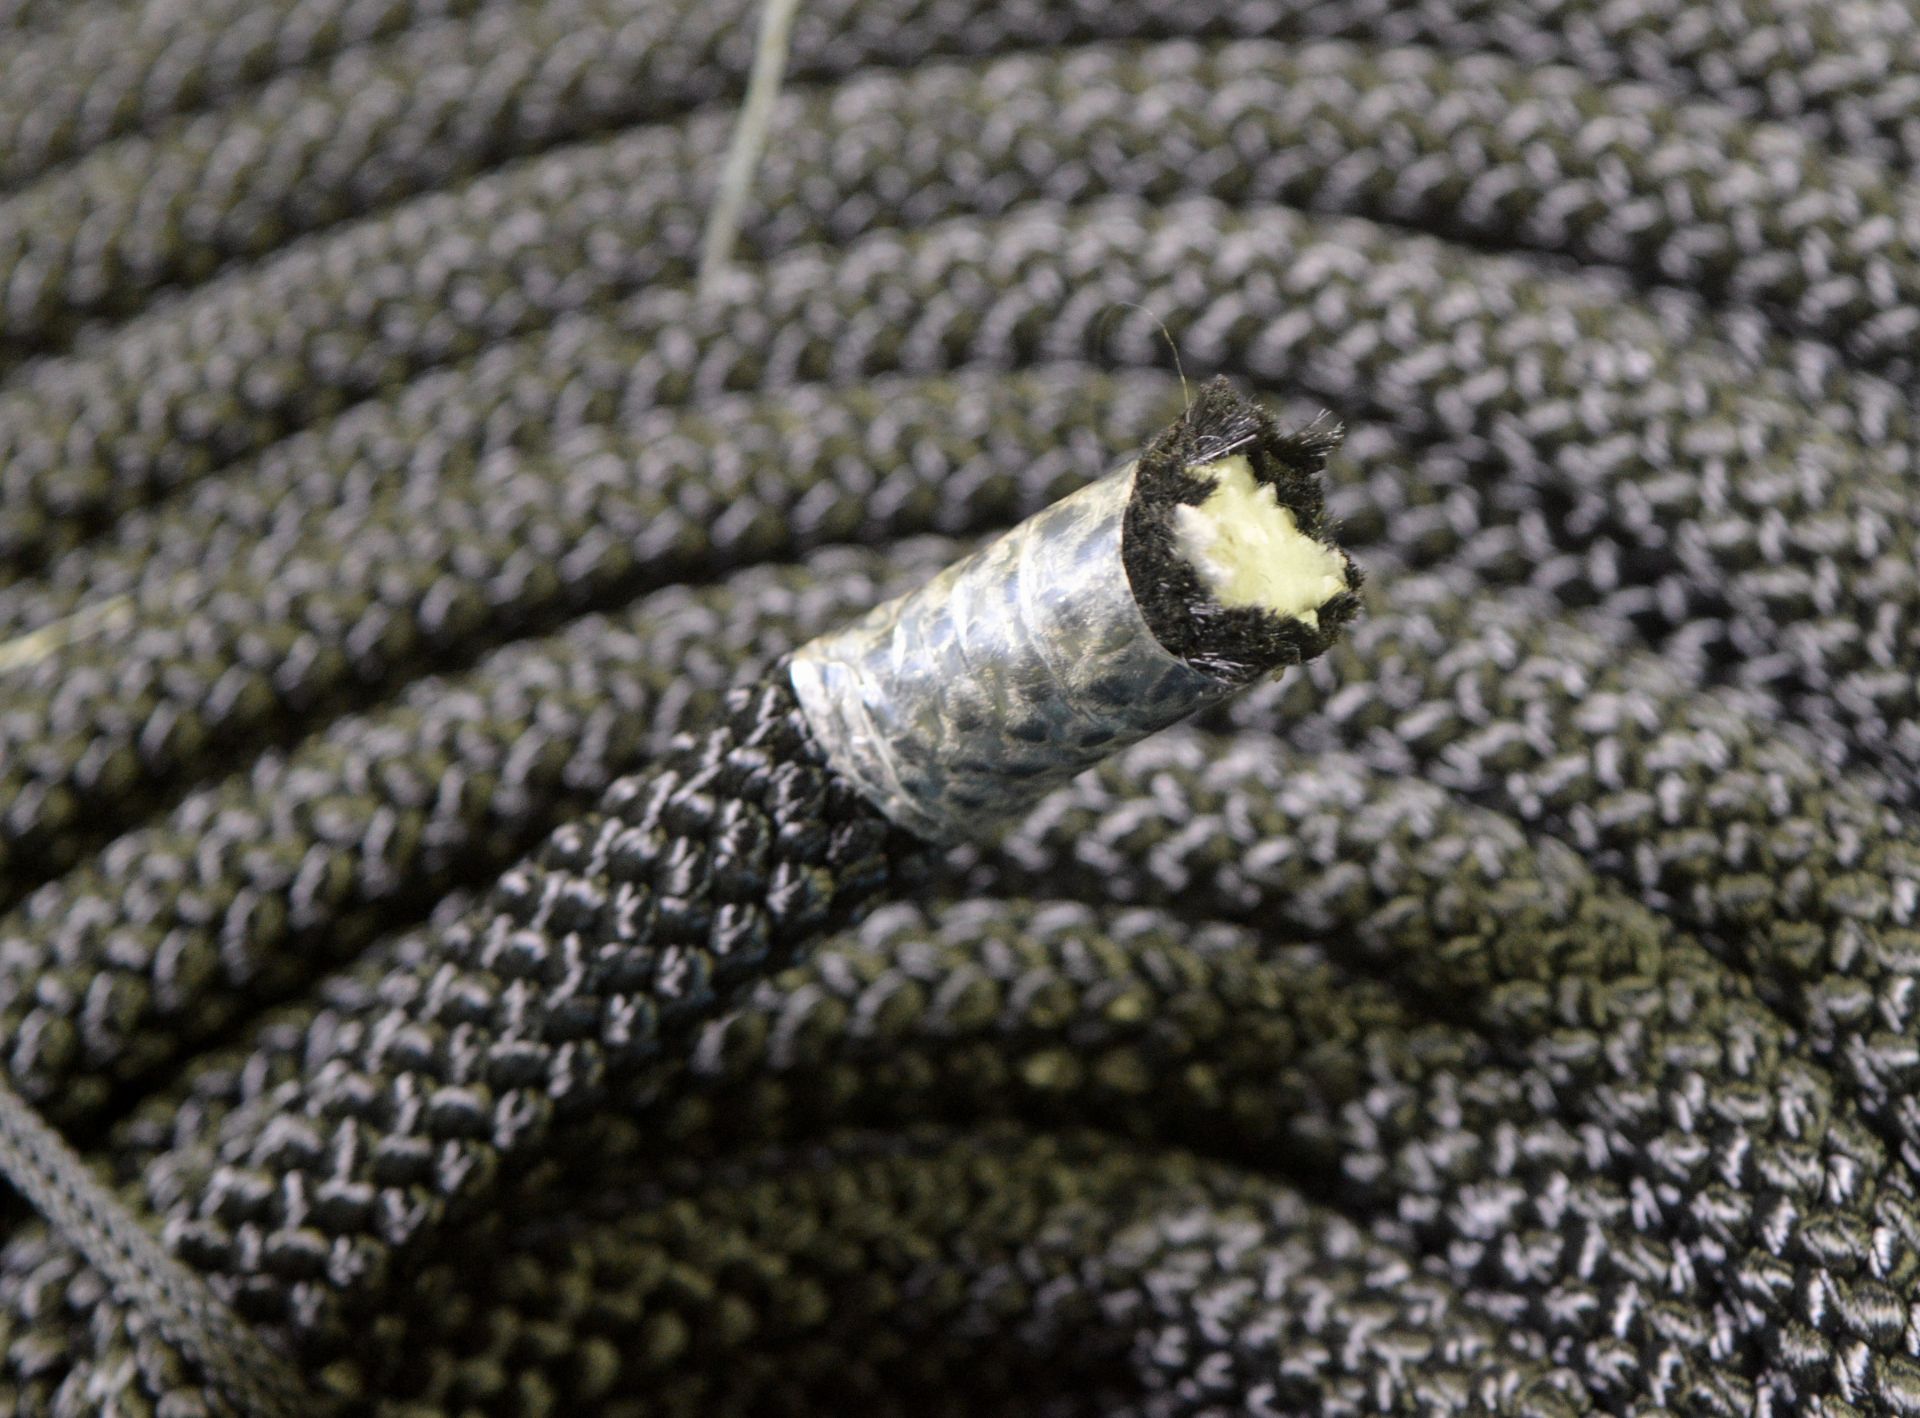 Black Abseil Rope 220M x 11mm - NSN 4020-99-789-3539 - Image 4 of 4